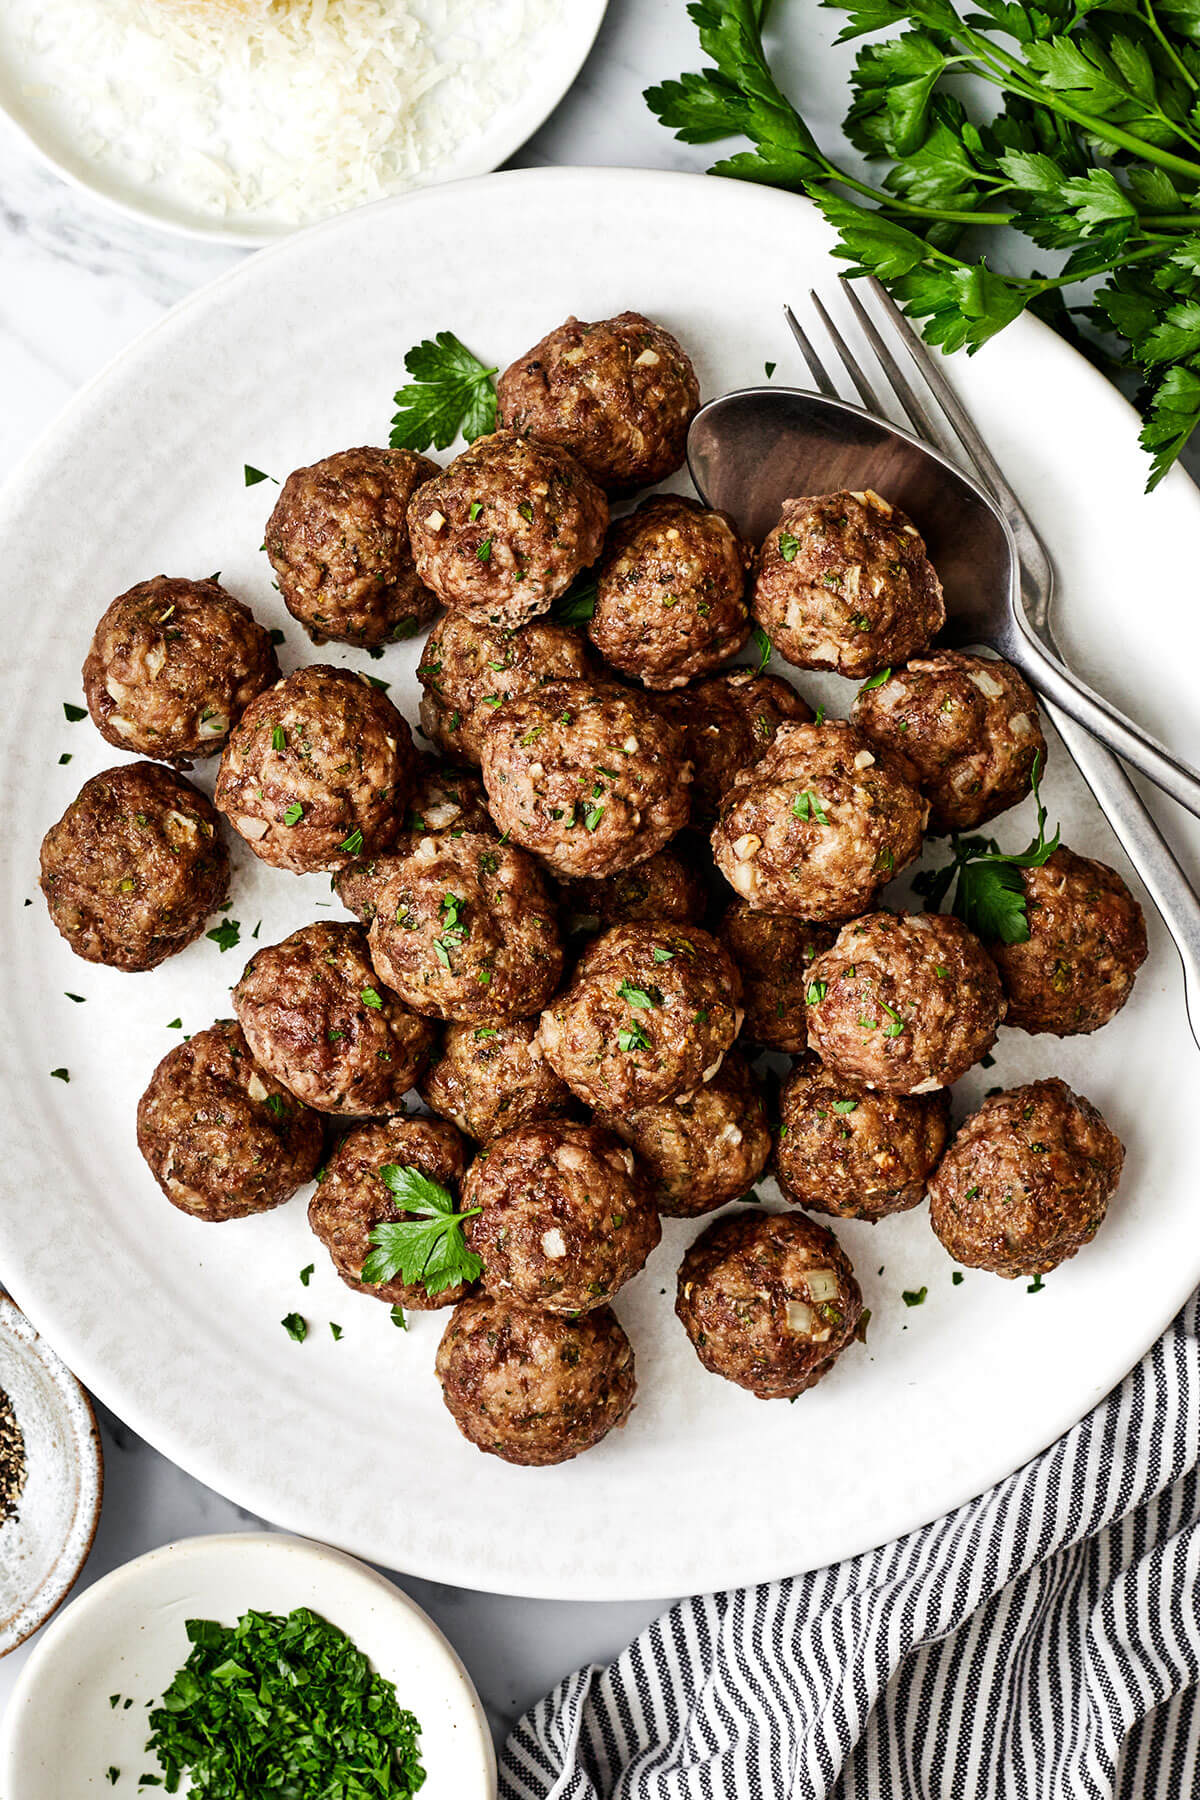 Baked meatballs on a white plate